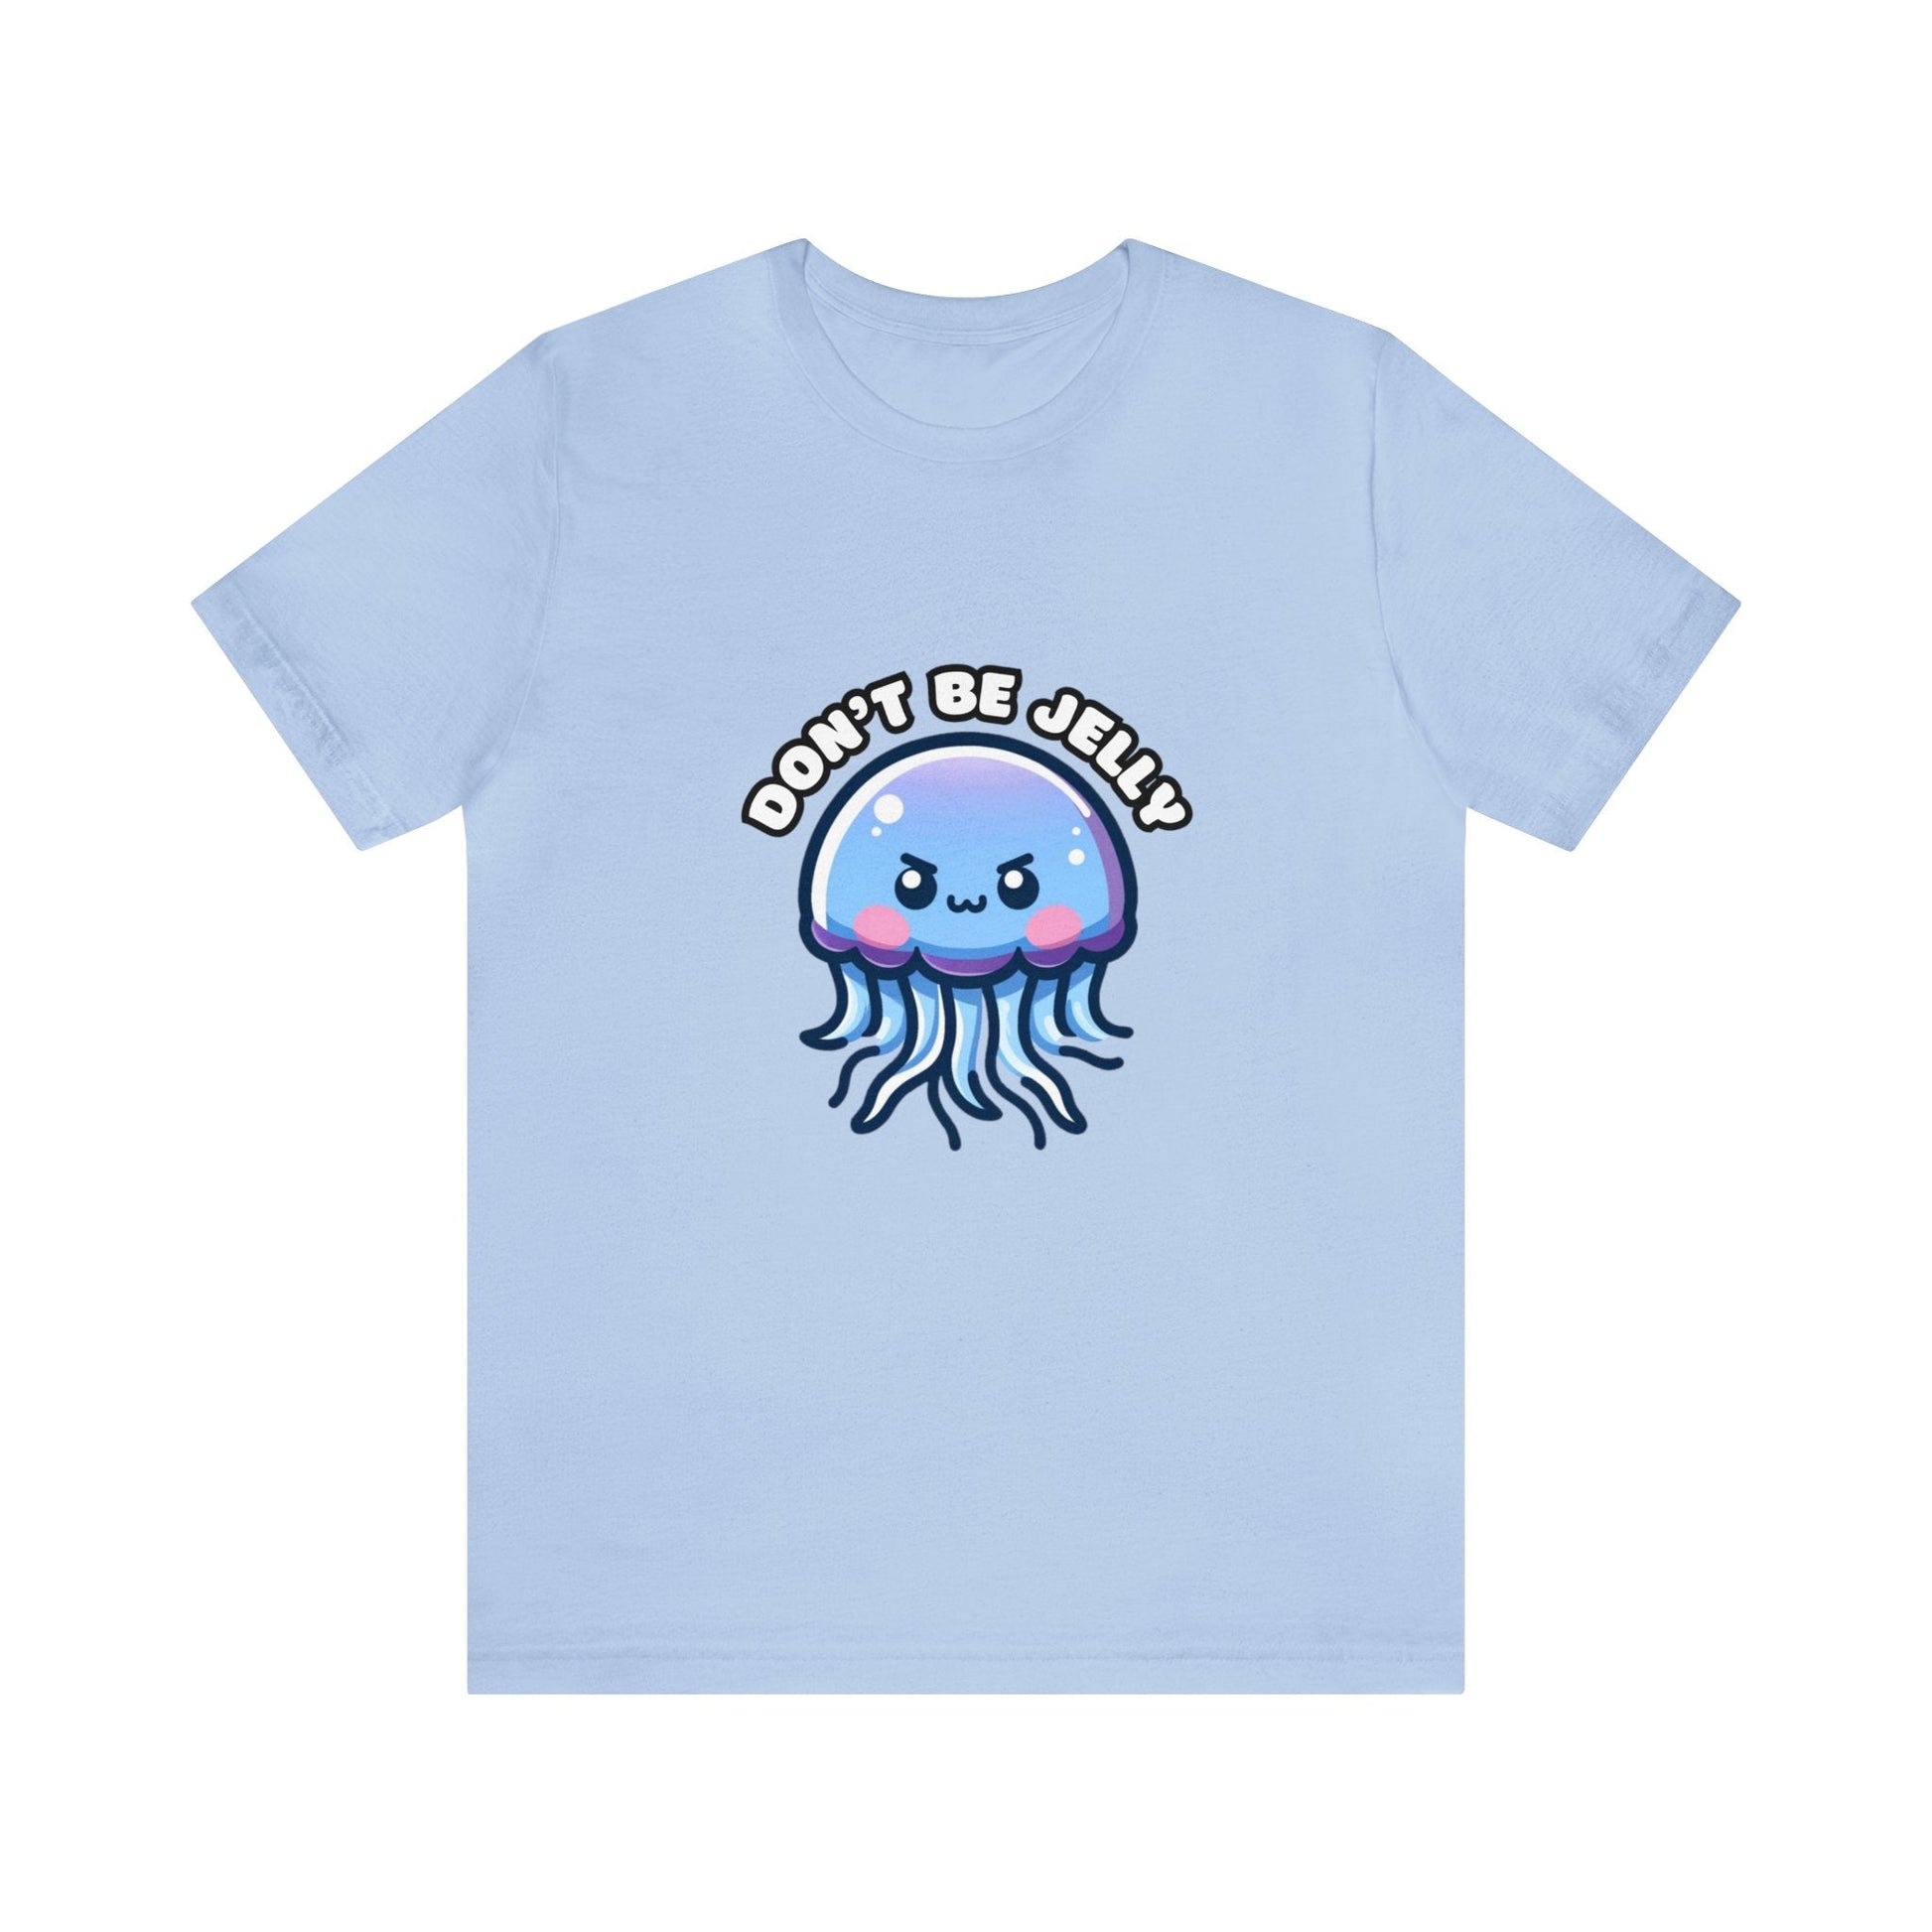 US - Don't Be Jelly - Jellyfish T-shirt Baby Blue / S